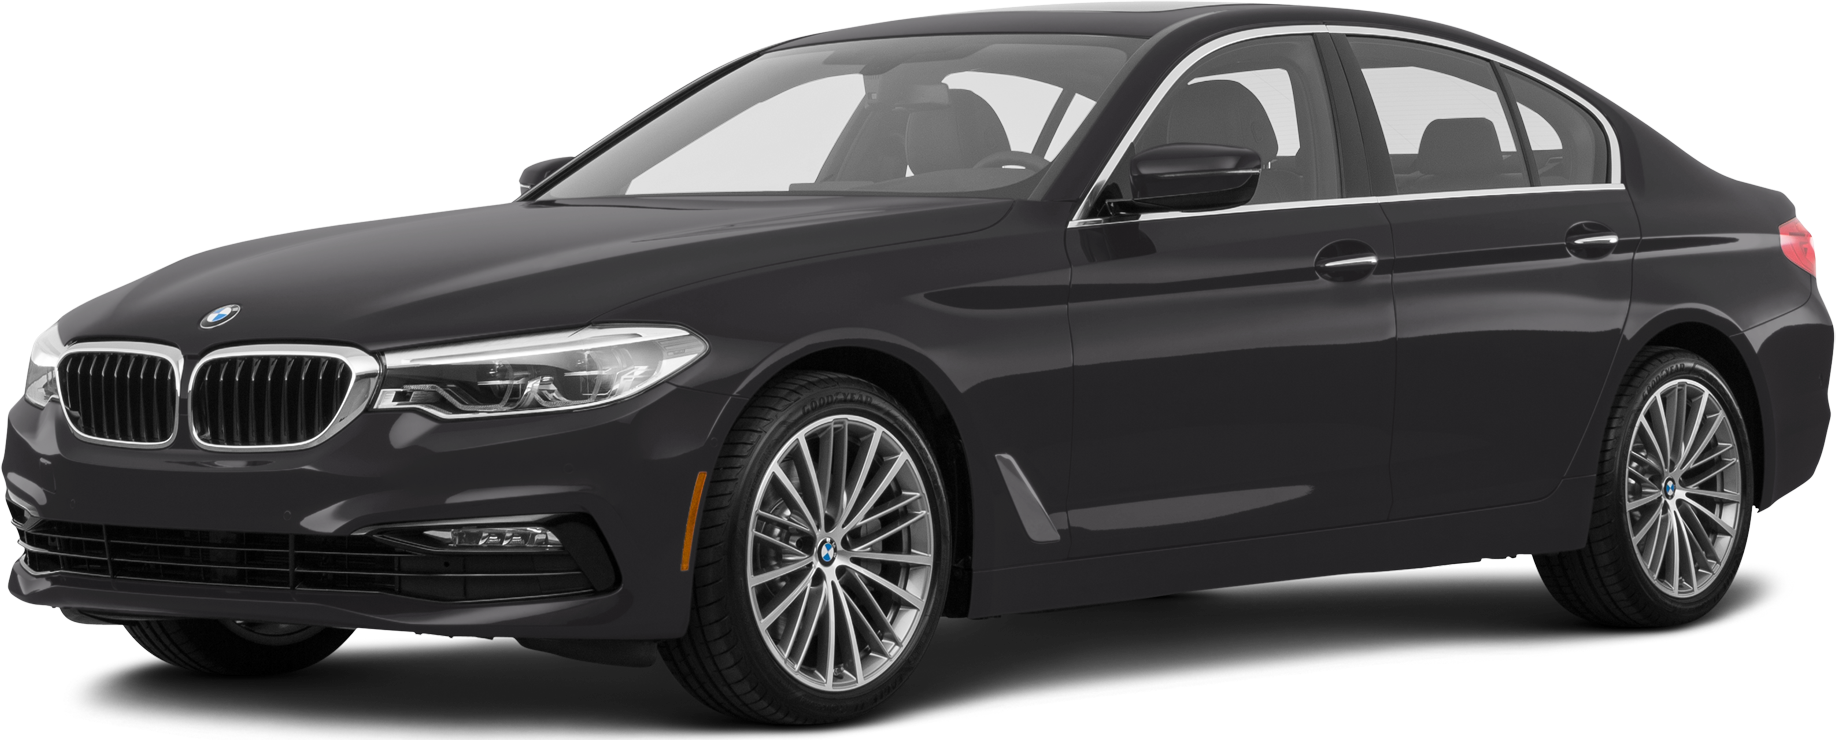 2017 BMW 5 Series Values & Cars for Sale | Kelley Blue Book